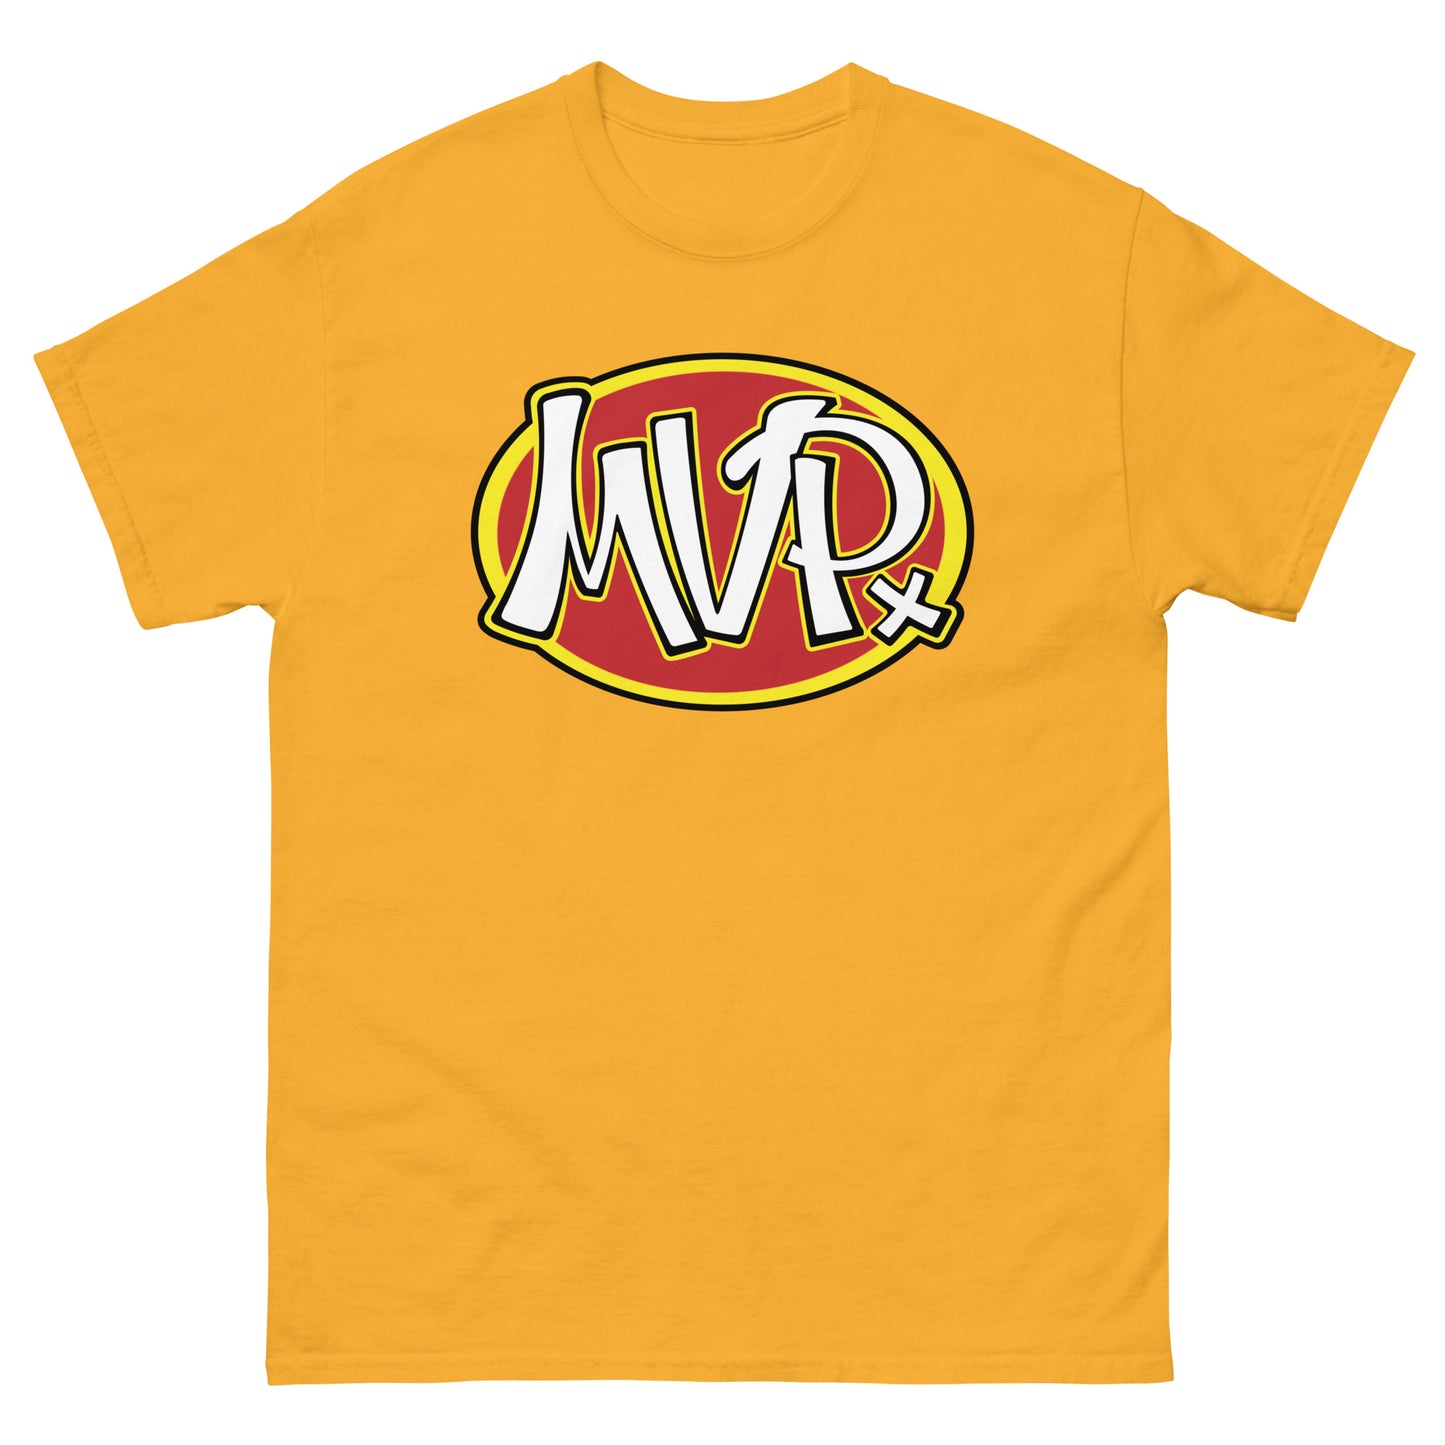 MVP (Most Valuable Player) - Men's classic tee